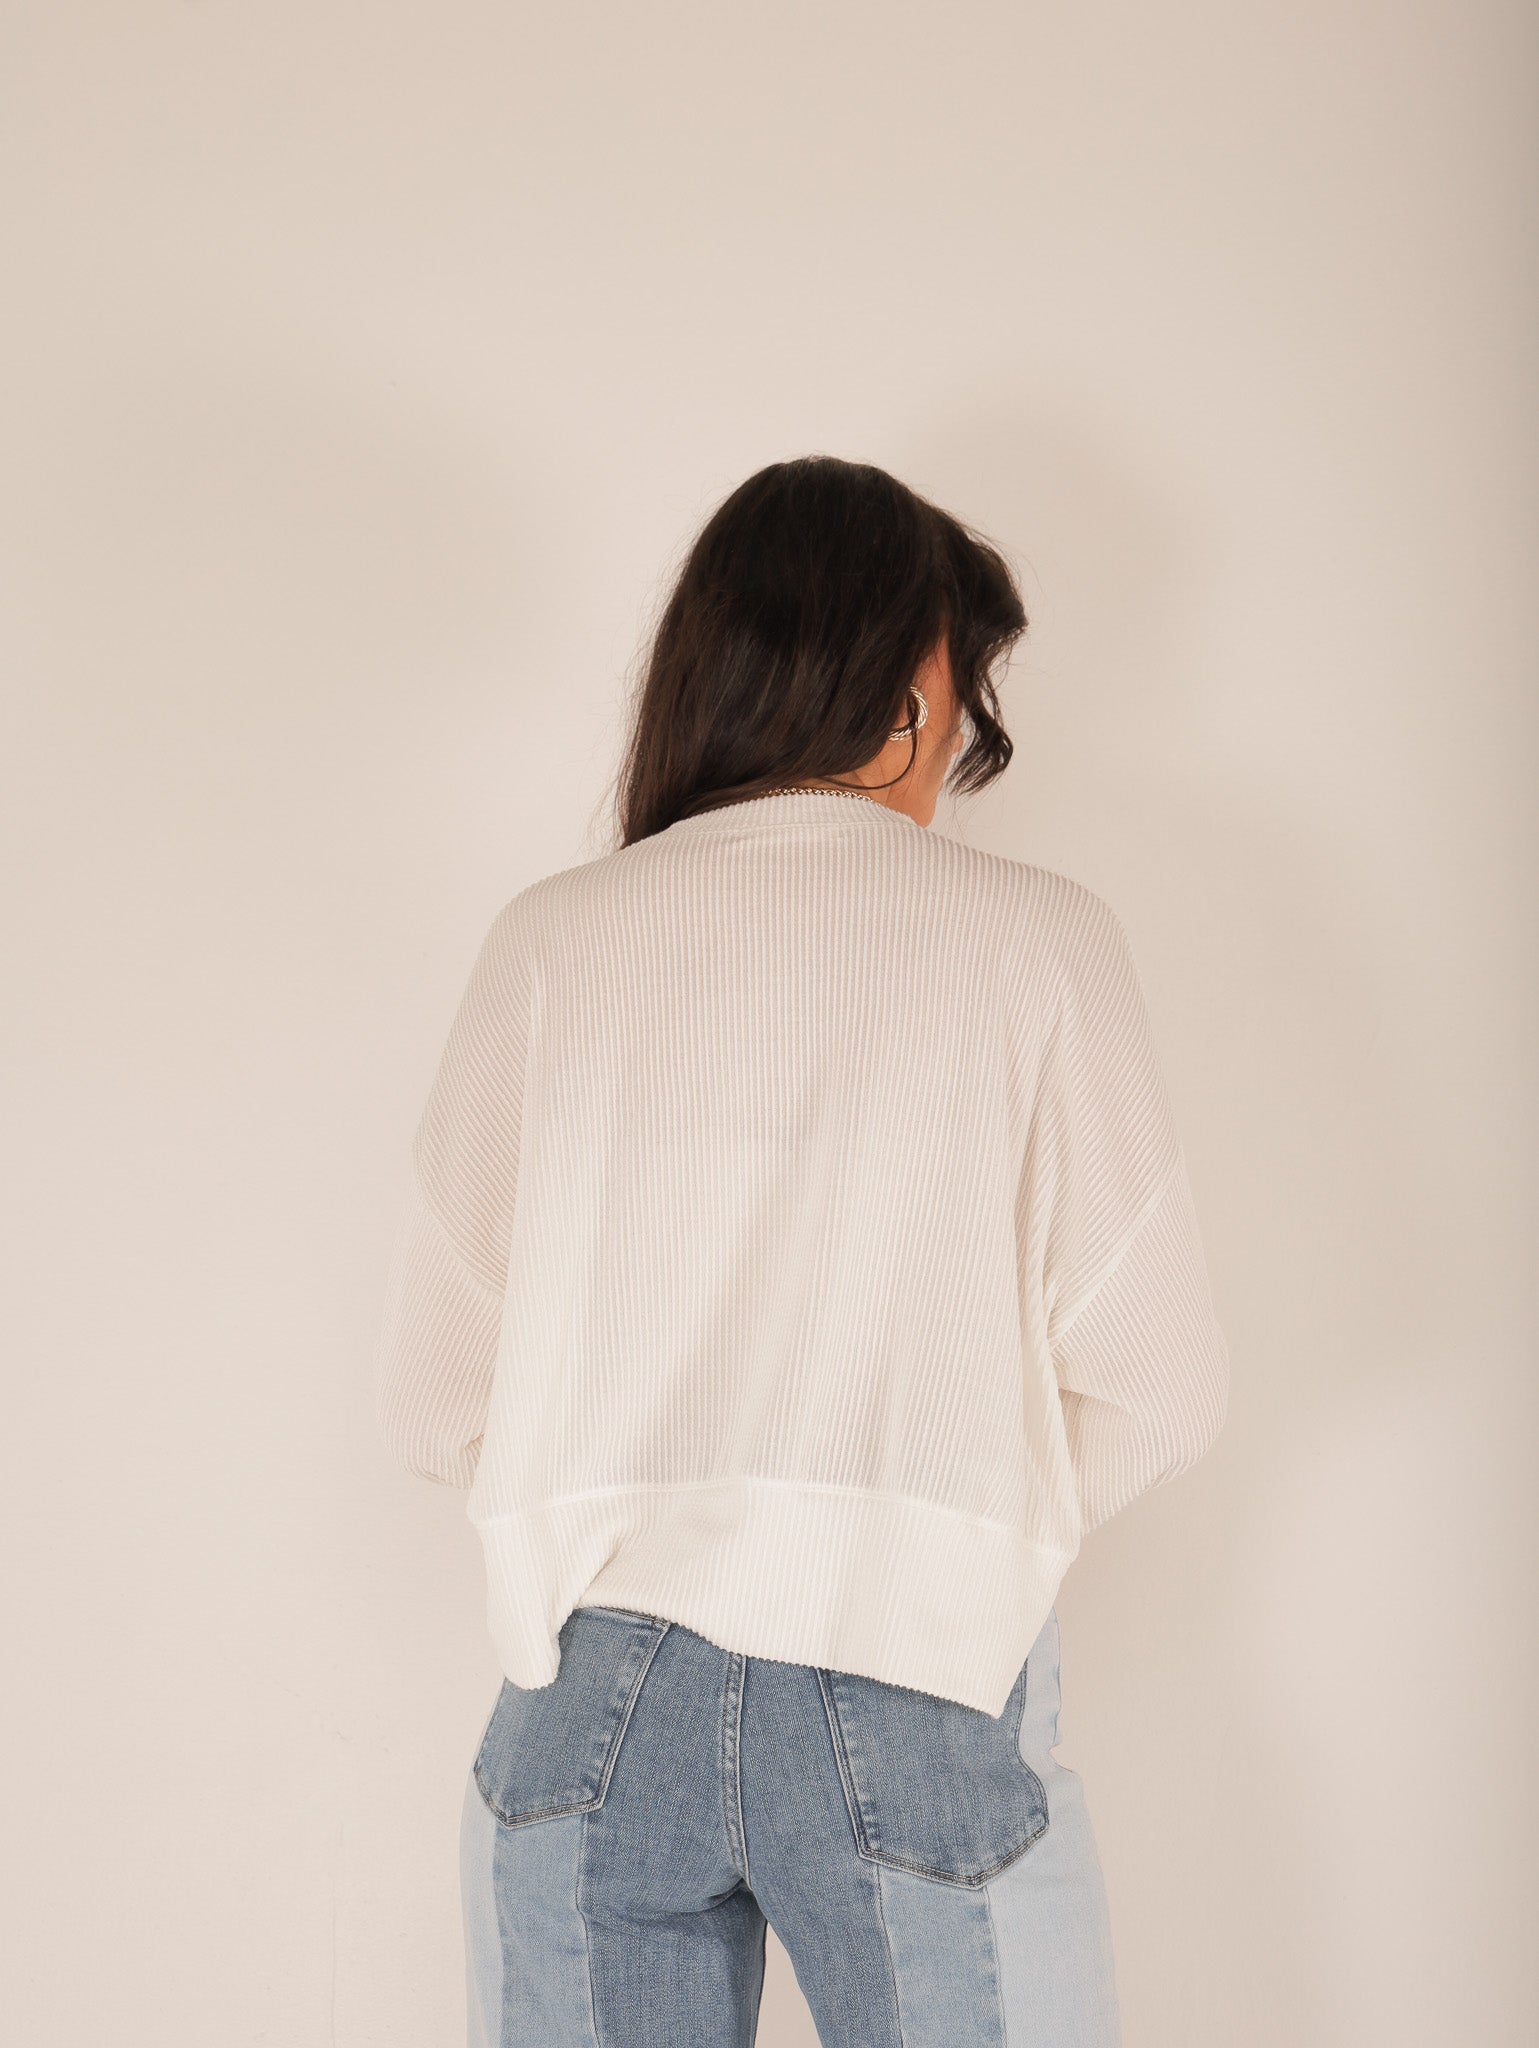 Molly Green - Stacey Long Sleeve - Casual_Tops